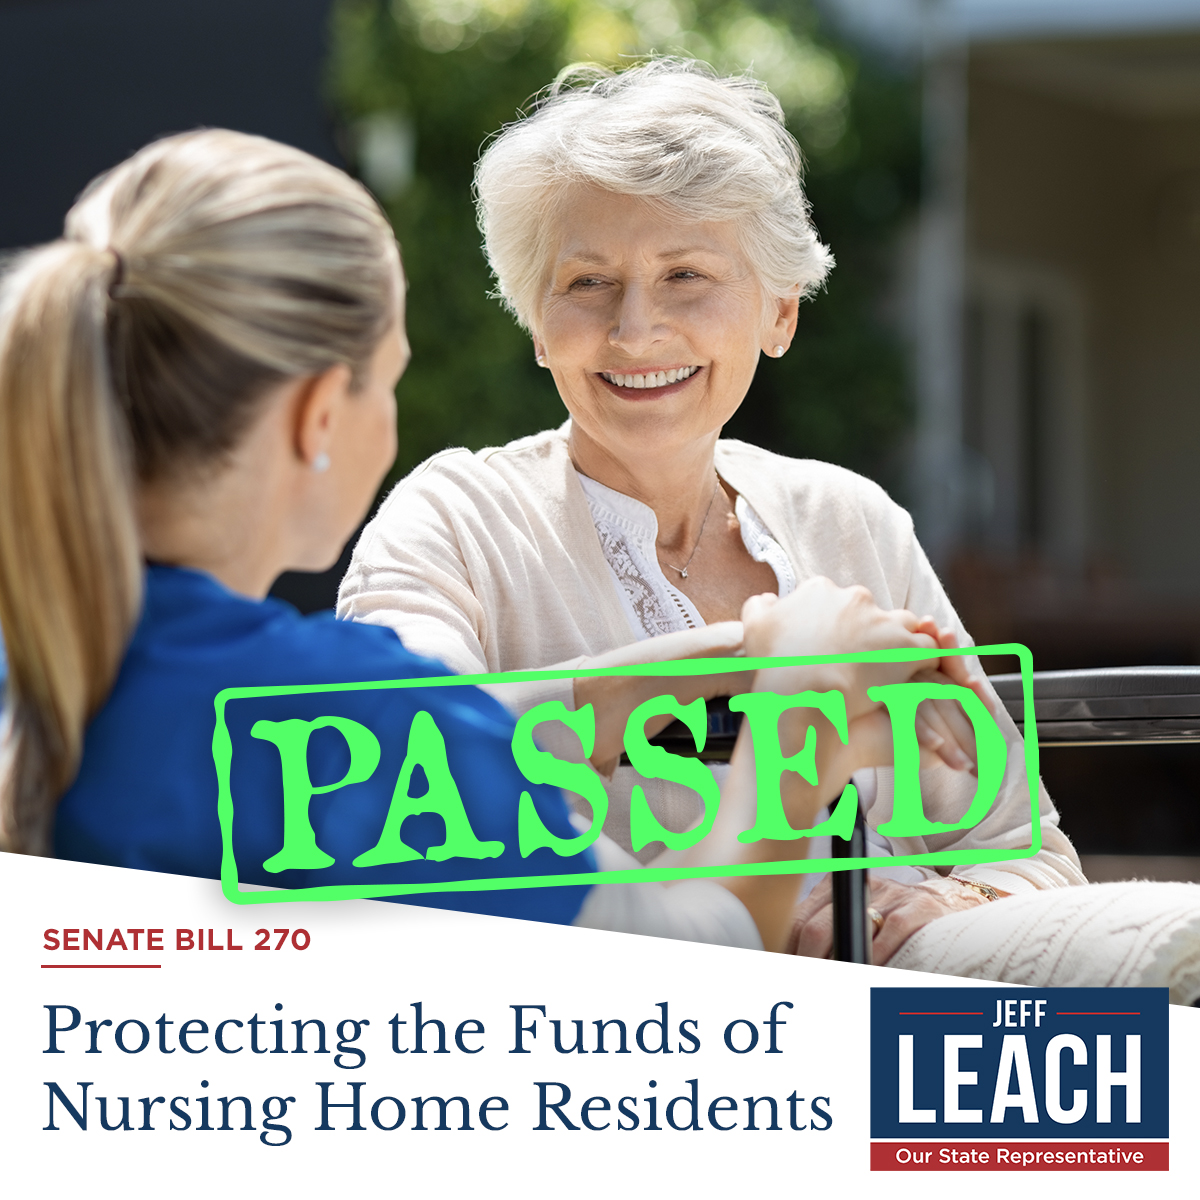 Protecting the Funds of Nursing Home Residents